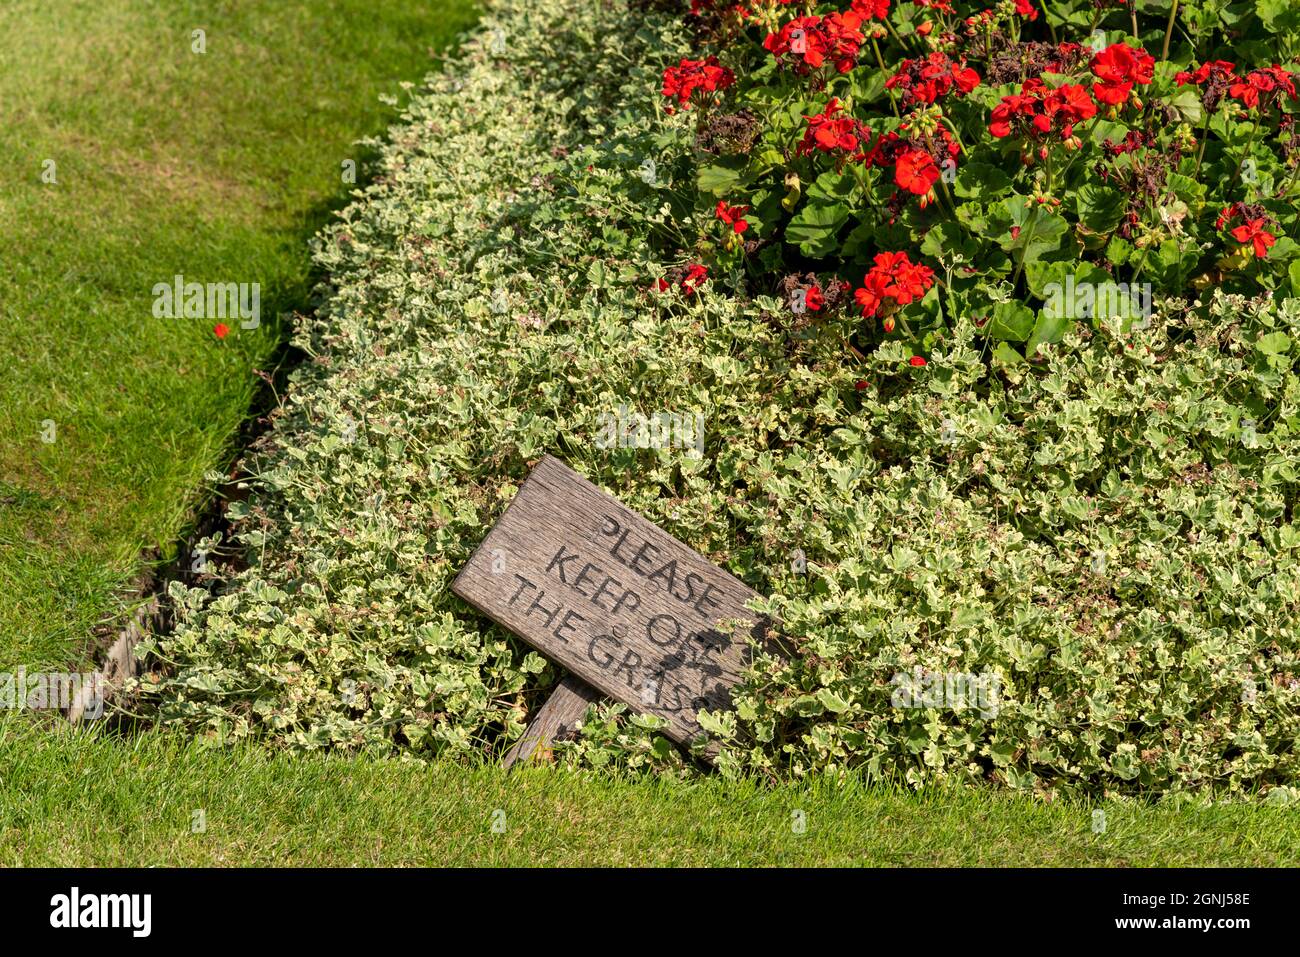 Buckingham Palace Memorial Gardens, with please keep off the grass sign, fallen over. Flower bed and lawn outside Buckingham Palace, London, UK Stock Photo